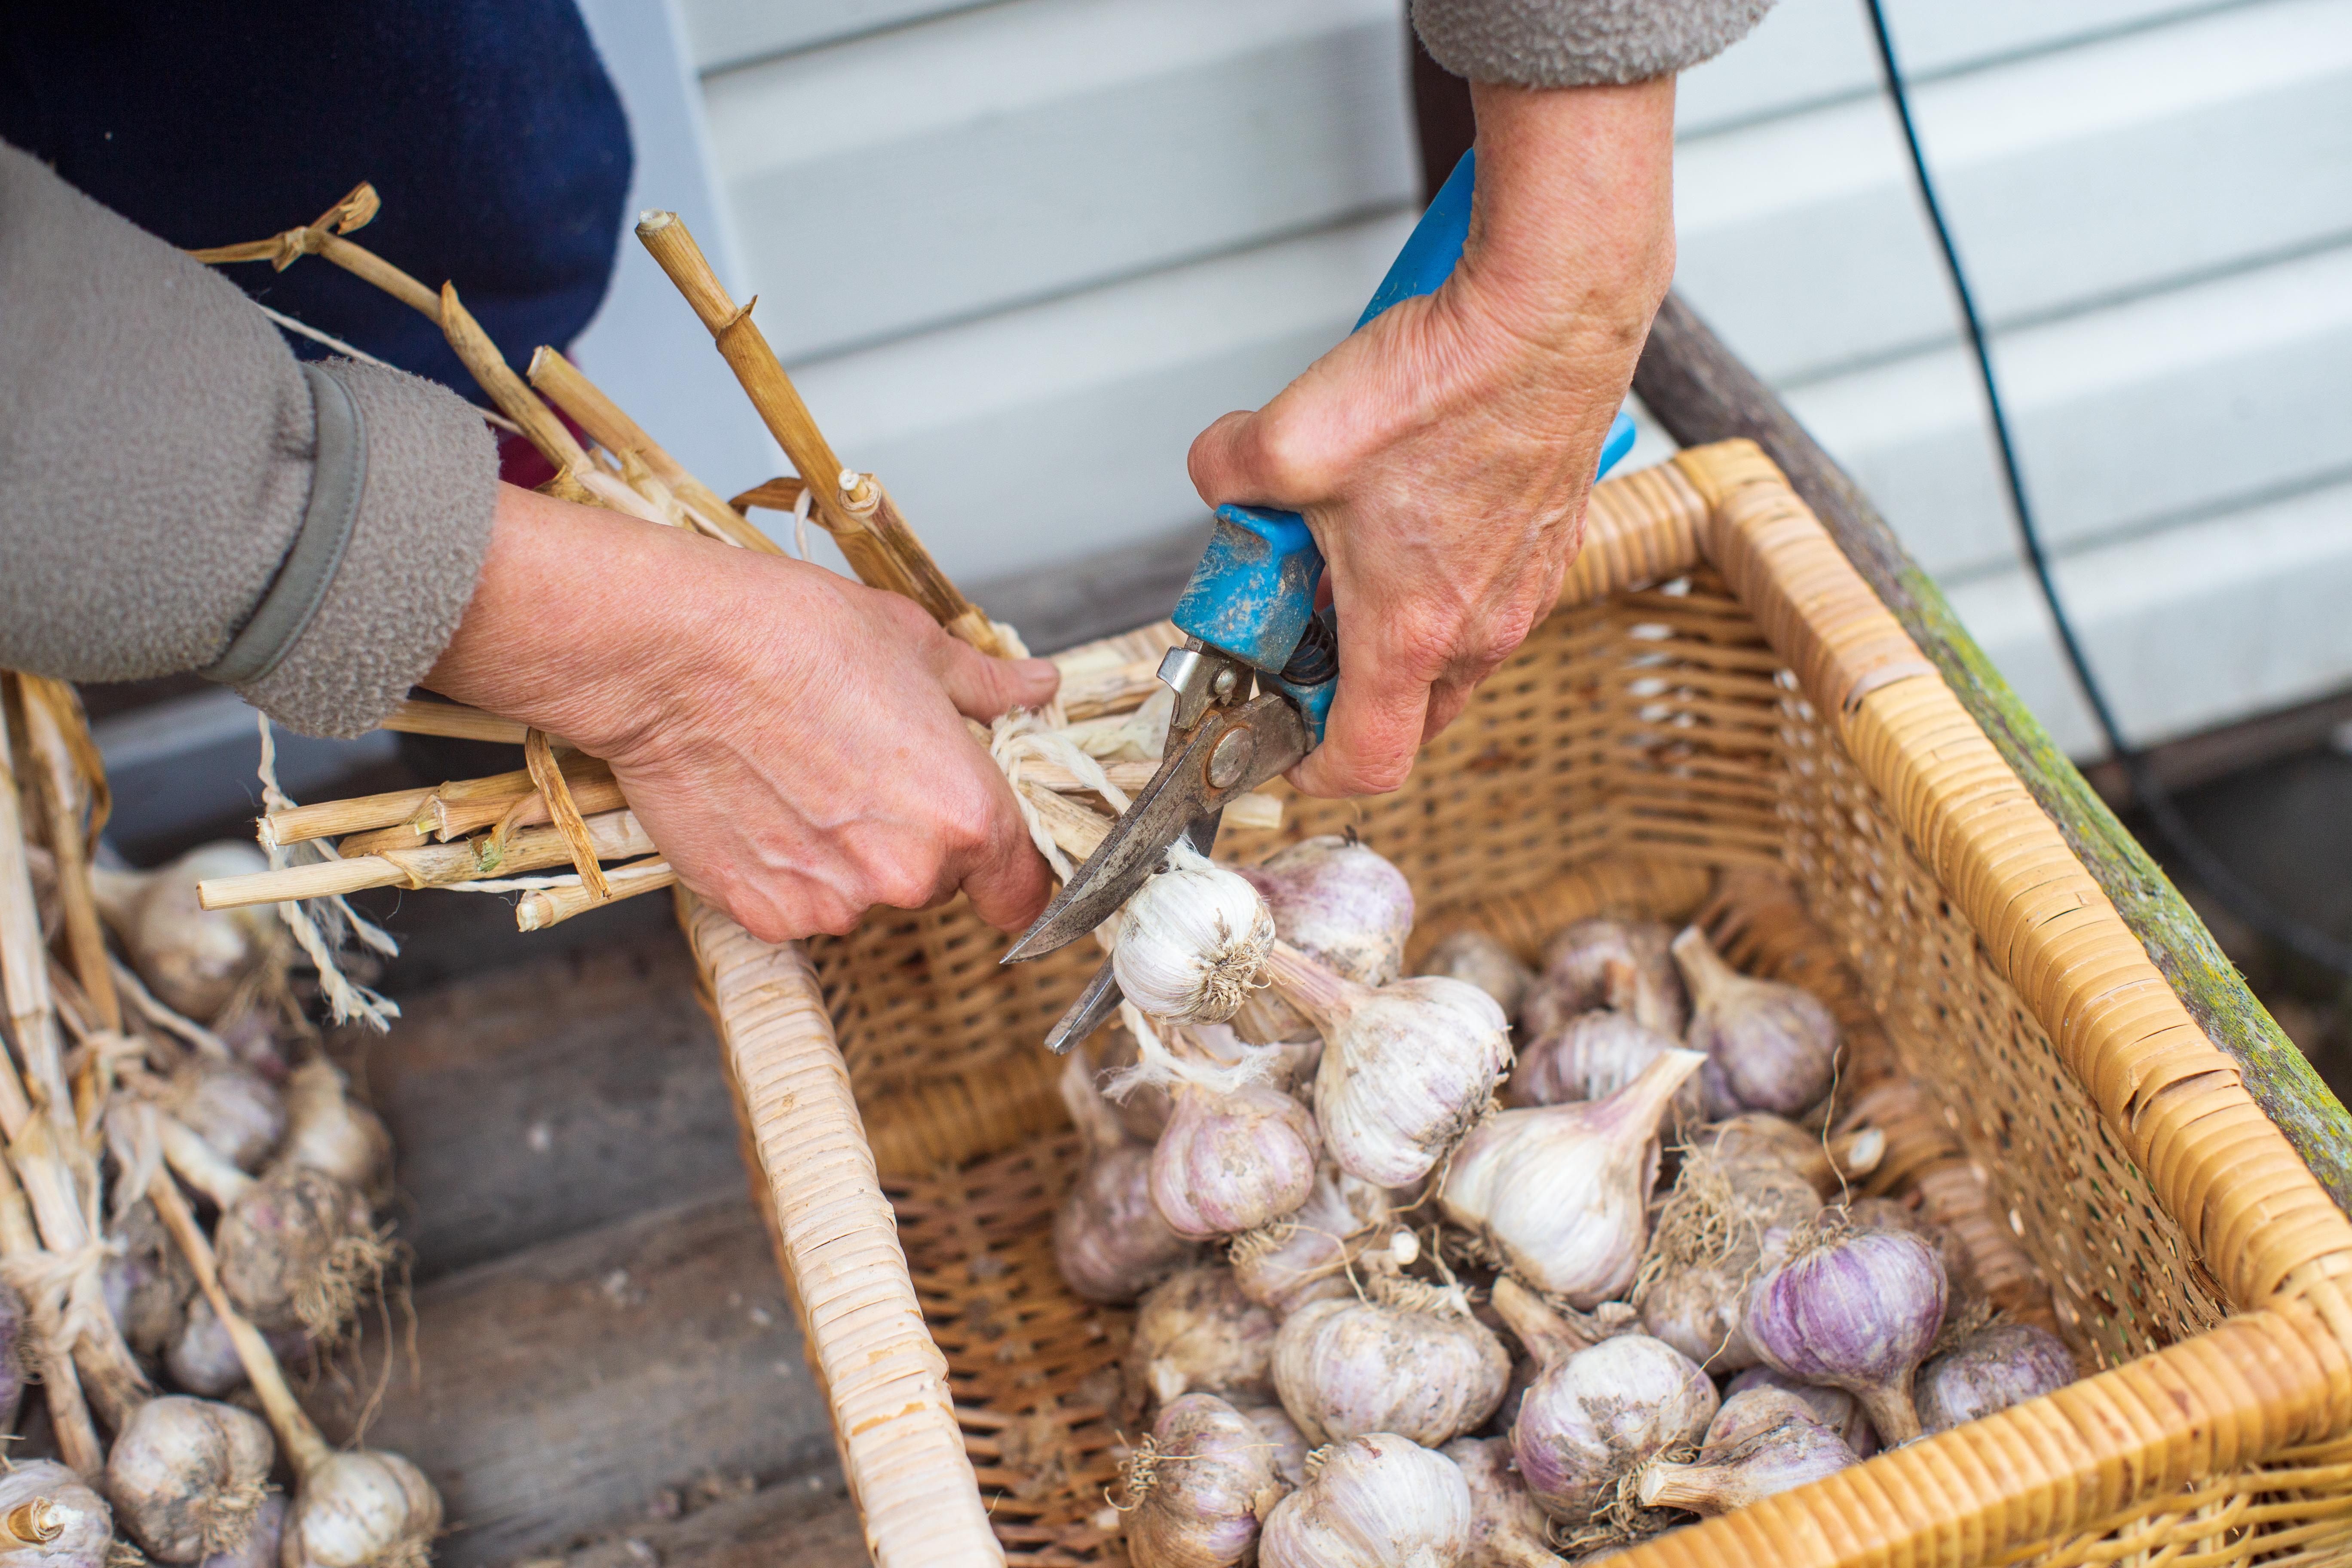 A pair of hands using shears to snip off garlic stems